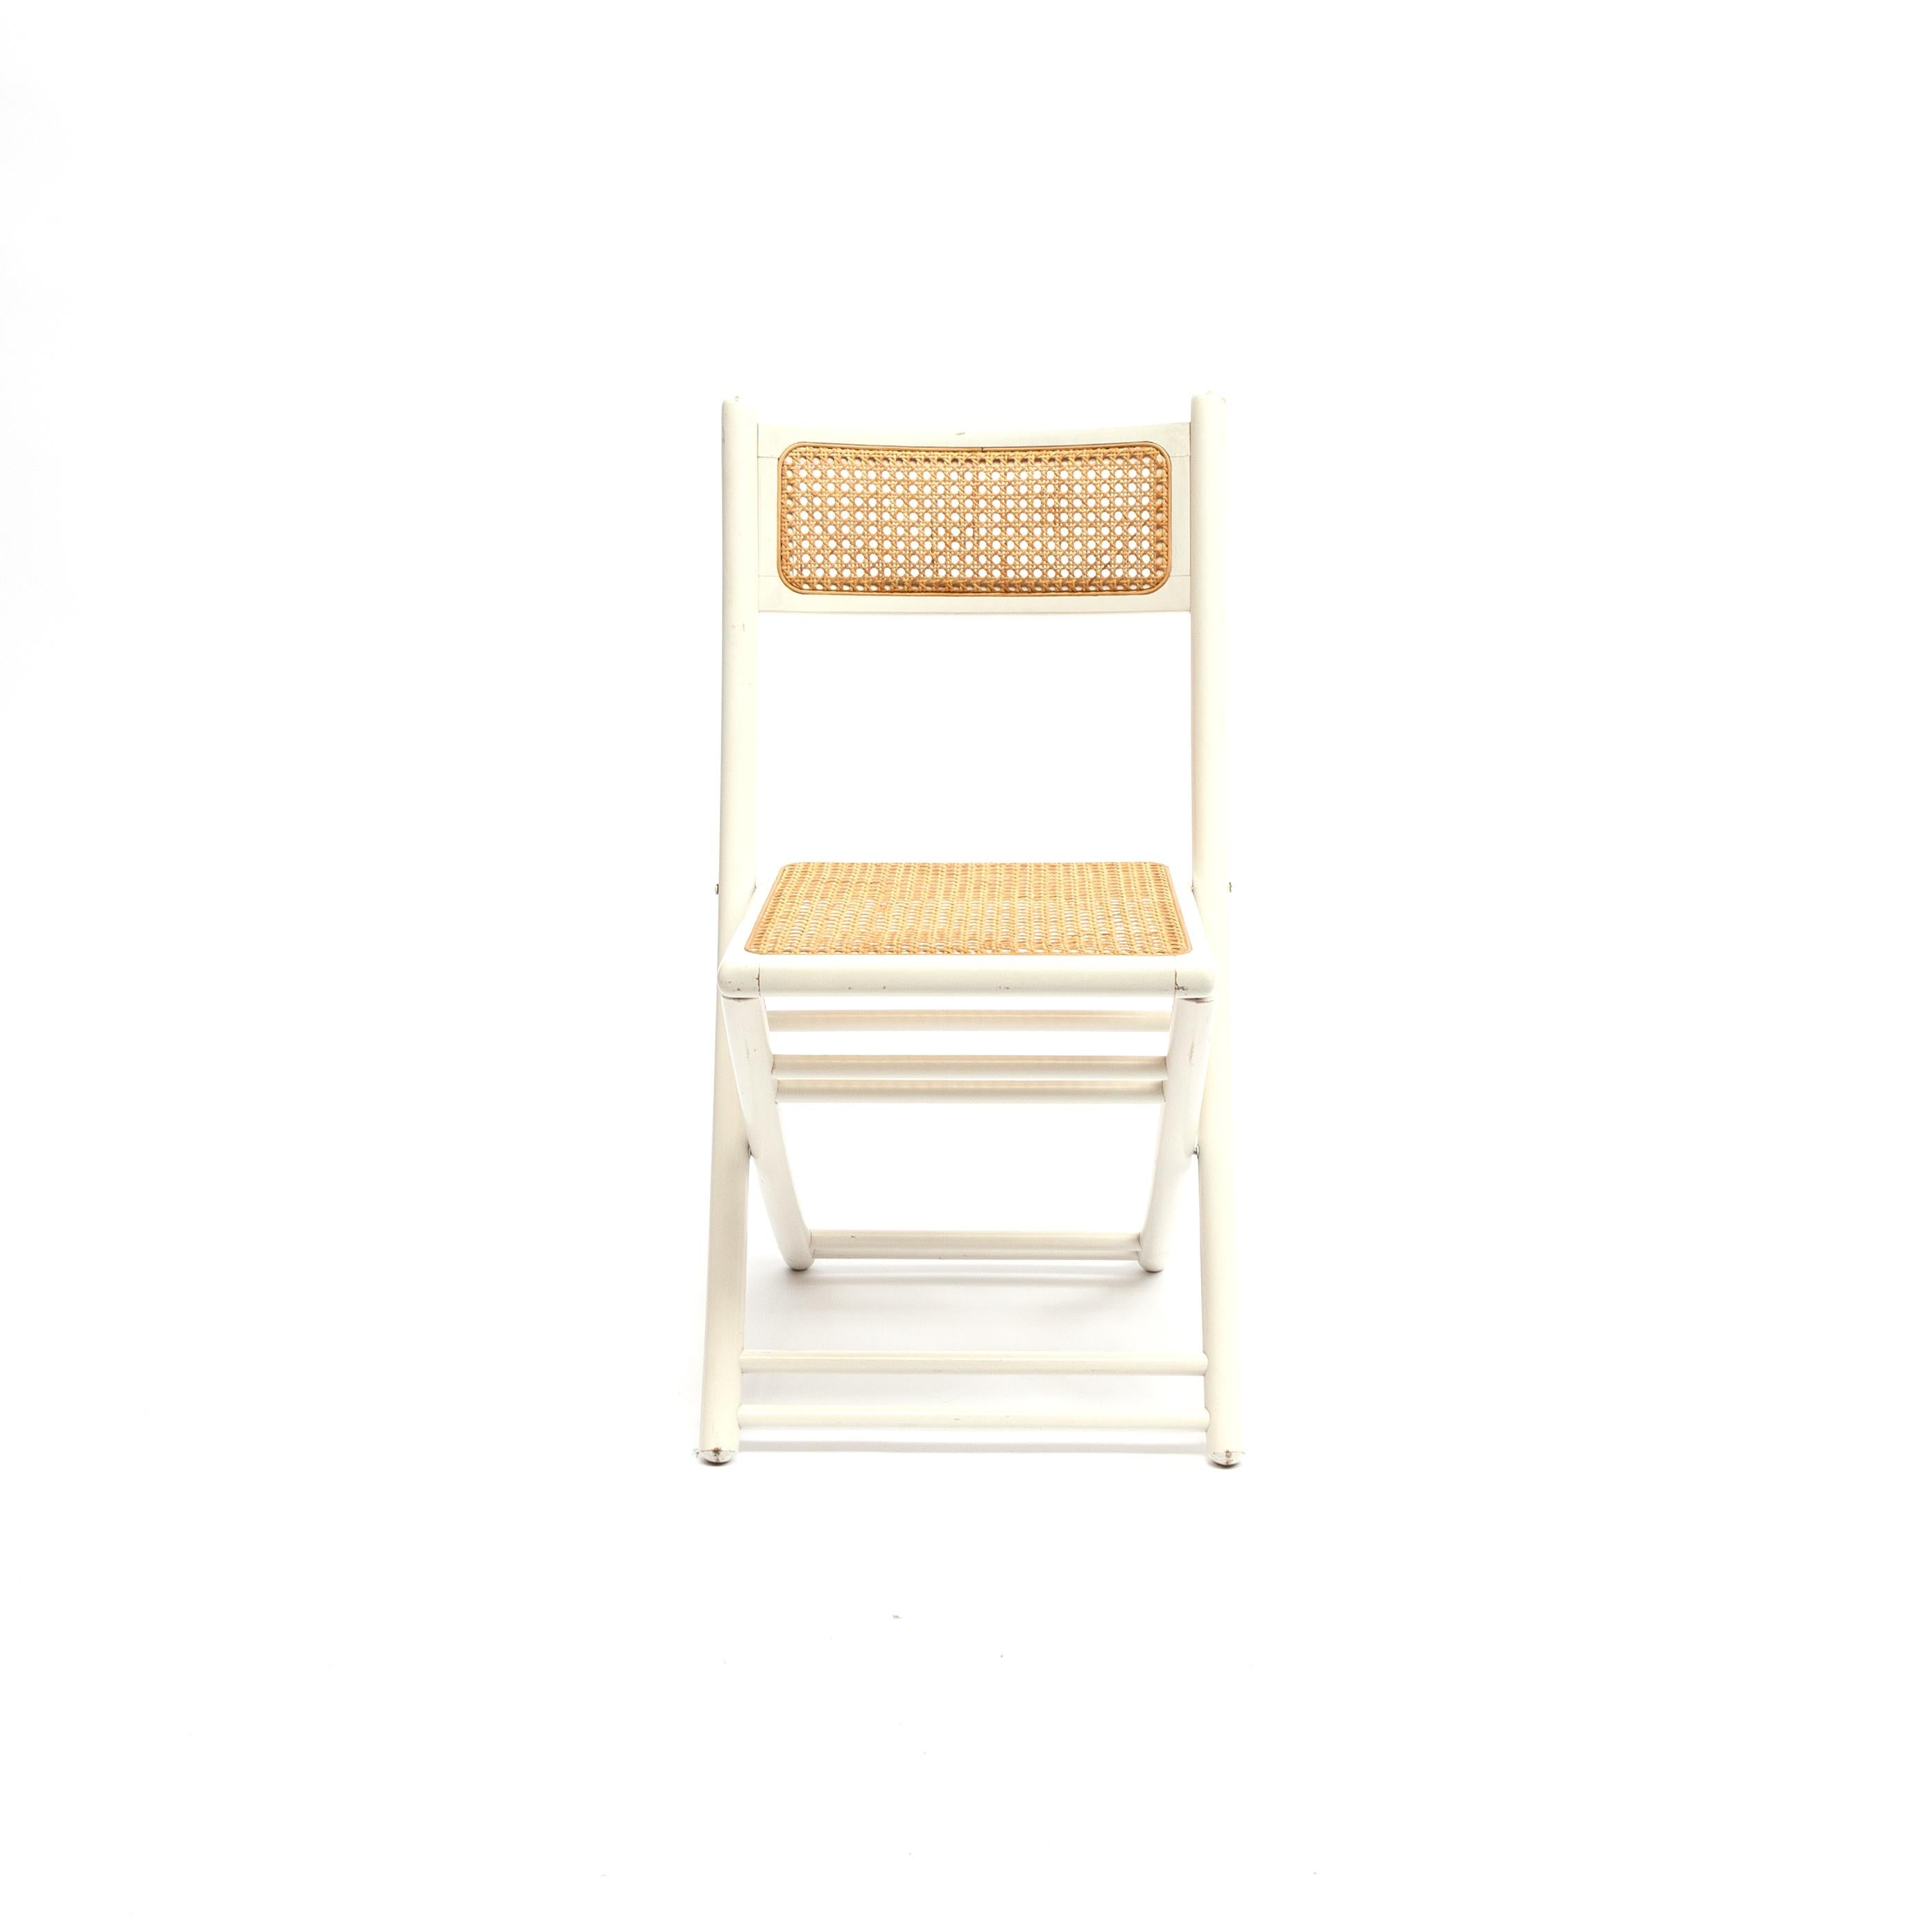 Original folding chair in white lacquered wood with webbing seat and backrest. In the typical Thonet style, circa 1960s-1970s. Original and ready to use condition.
 